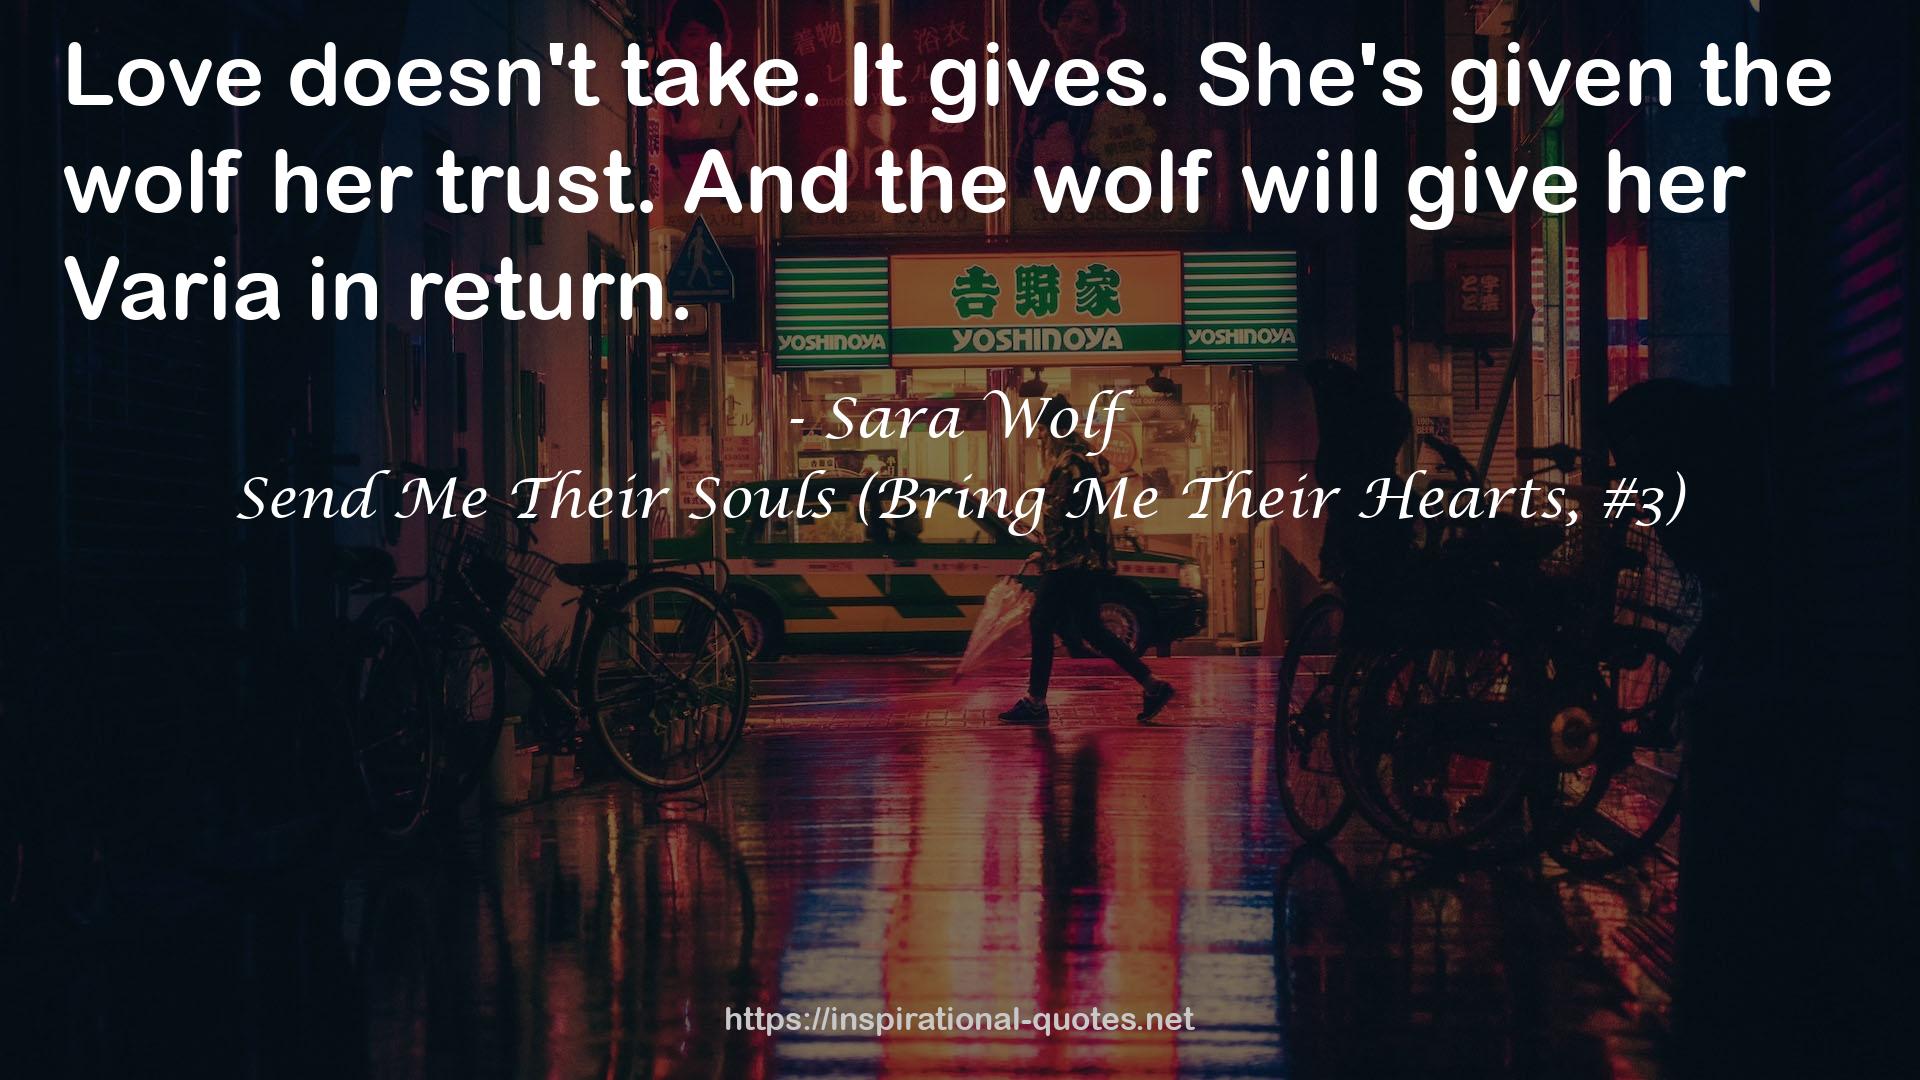 Send Me Their Souls (Bring Me Their Hearts, #3) QUOTES